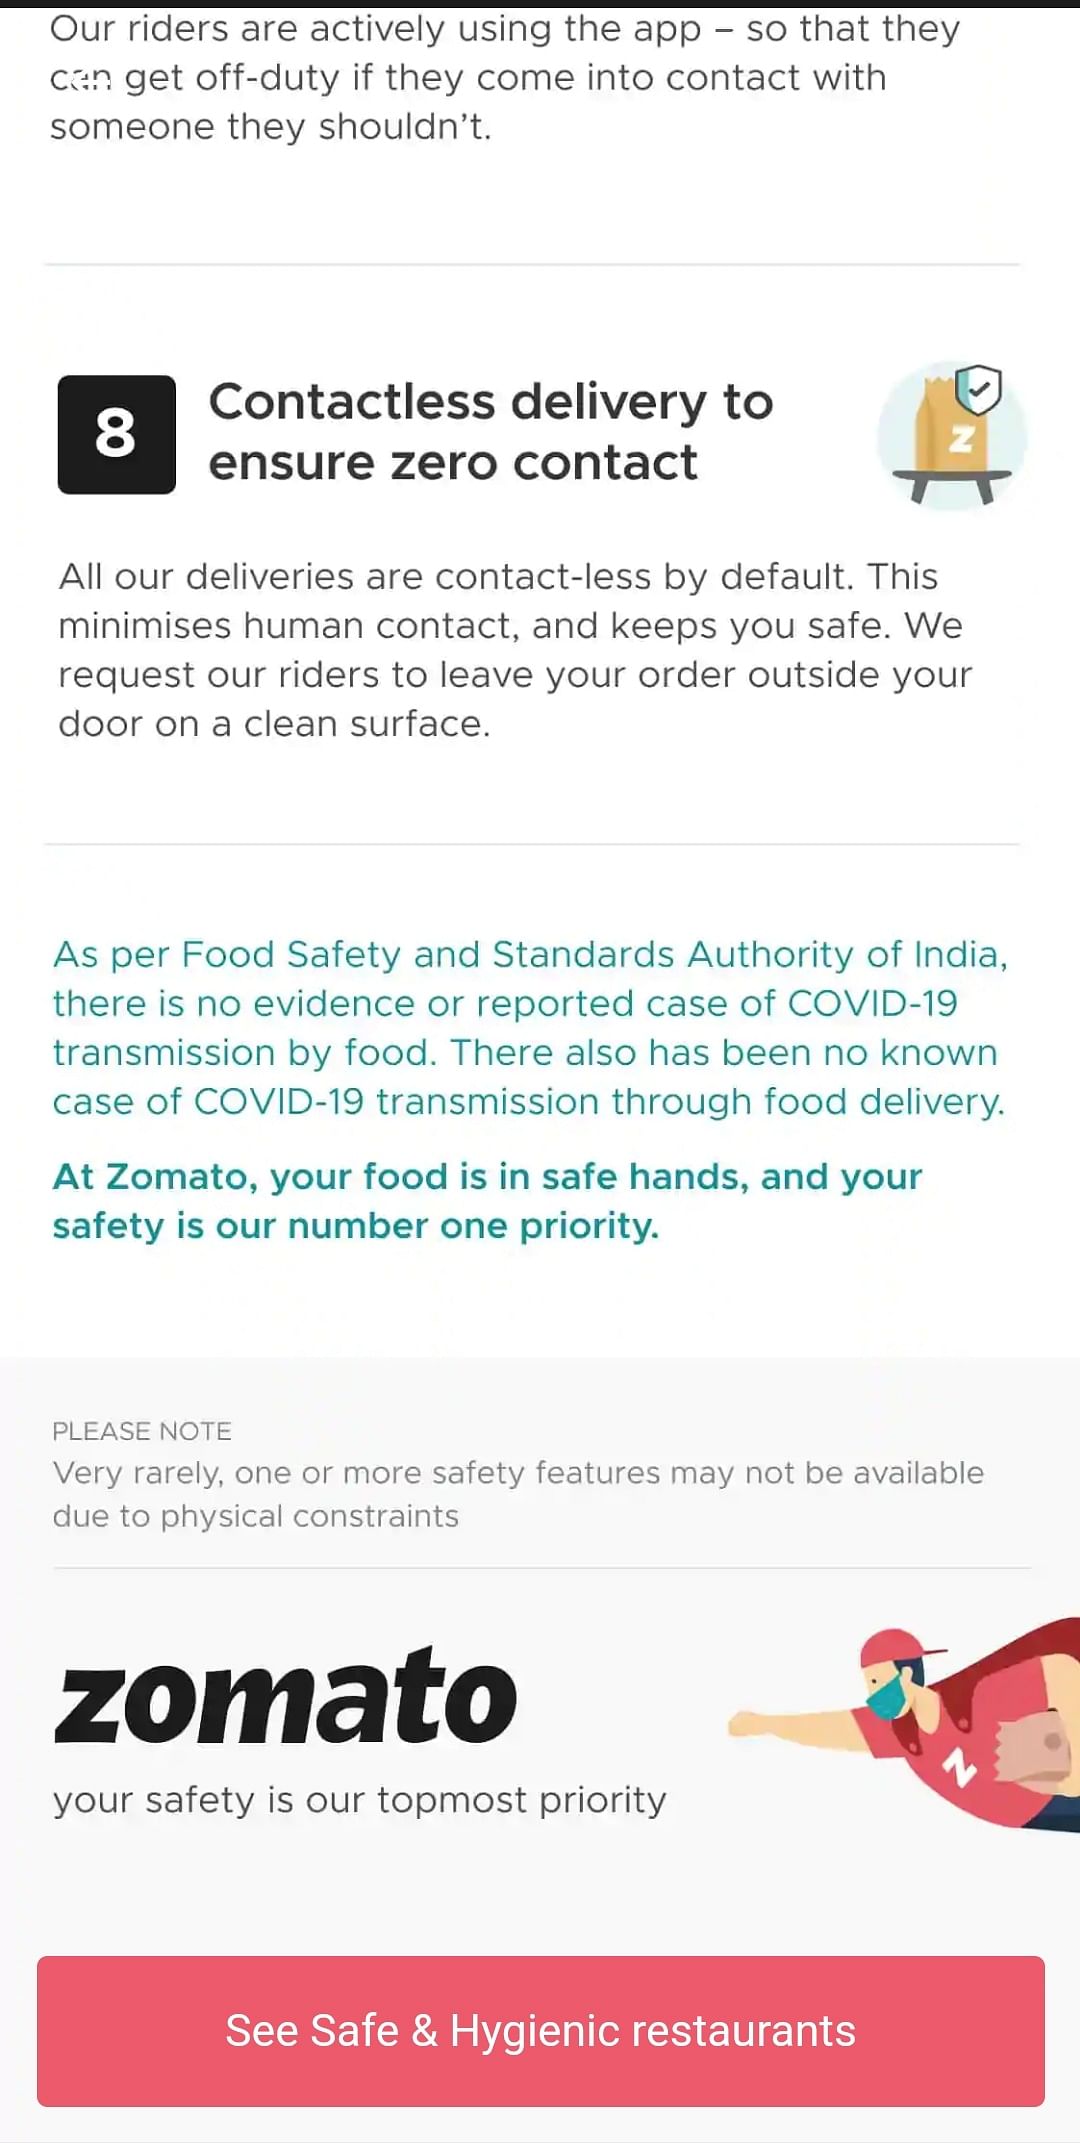 Zomato's ad makes a case for 'safety' while ordering in